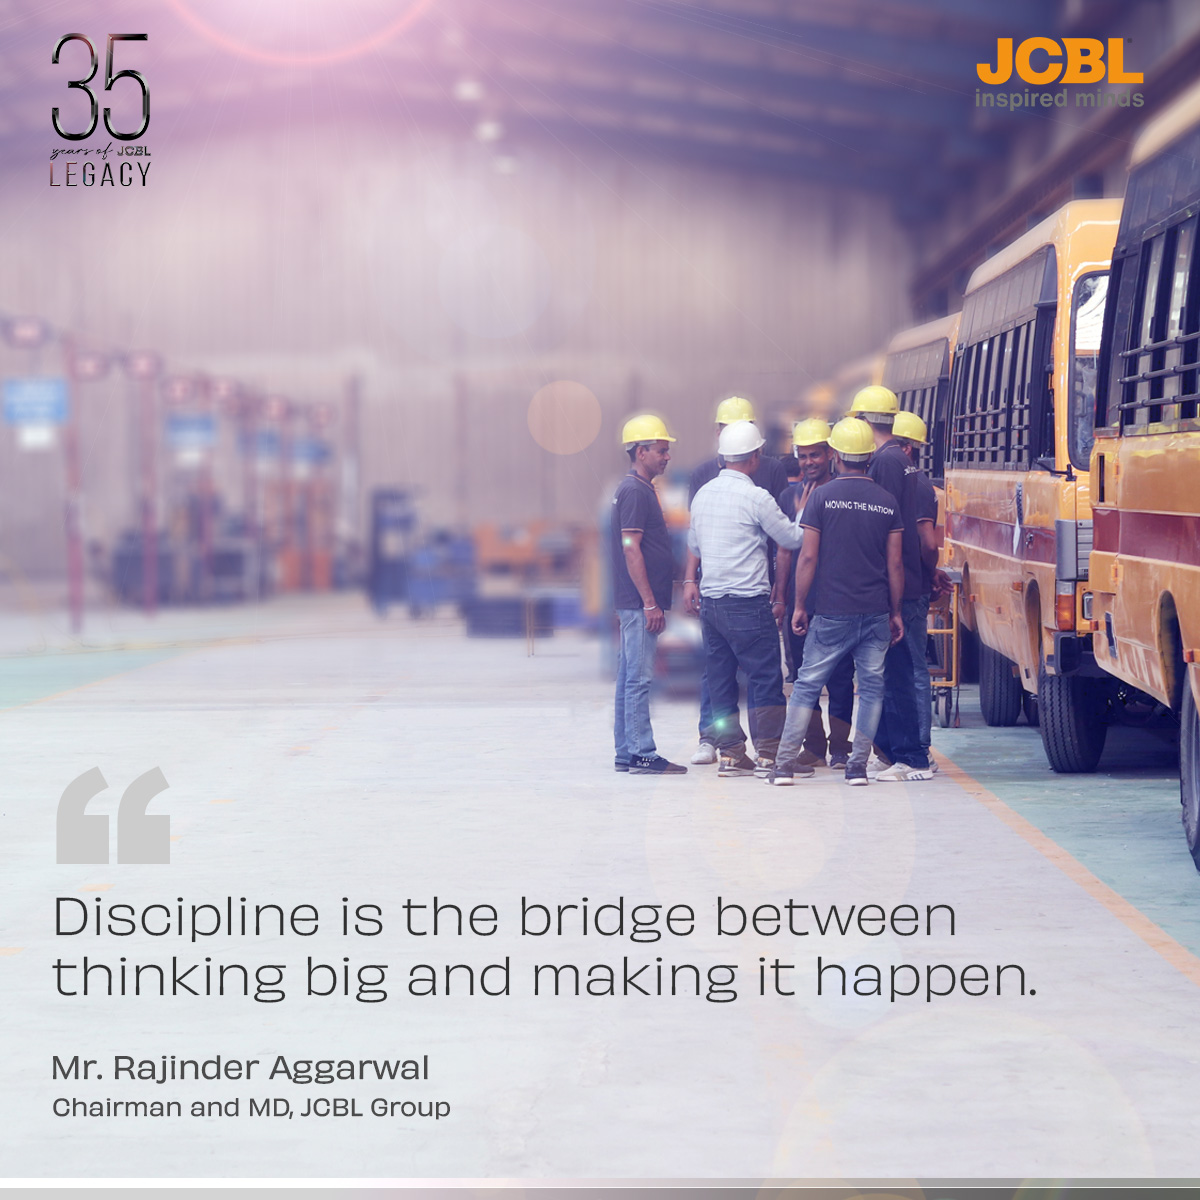 The inspiring vision of our CMD, Mr. Rajinder Aggarwal, guides us to achieve more, with discipline as our key tool.
#35YearsOfLegacy #35YearsStrong #InspiredMinds #JCBLGroup